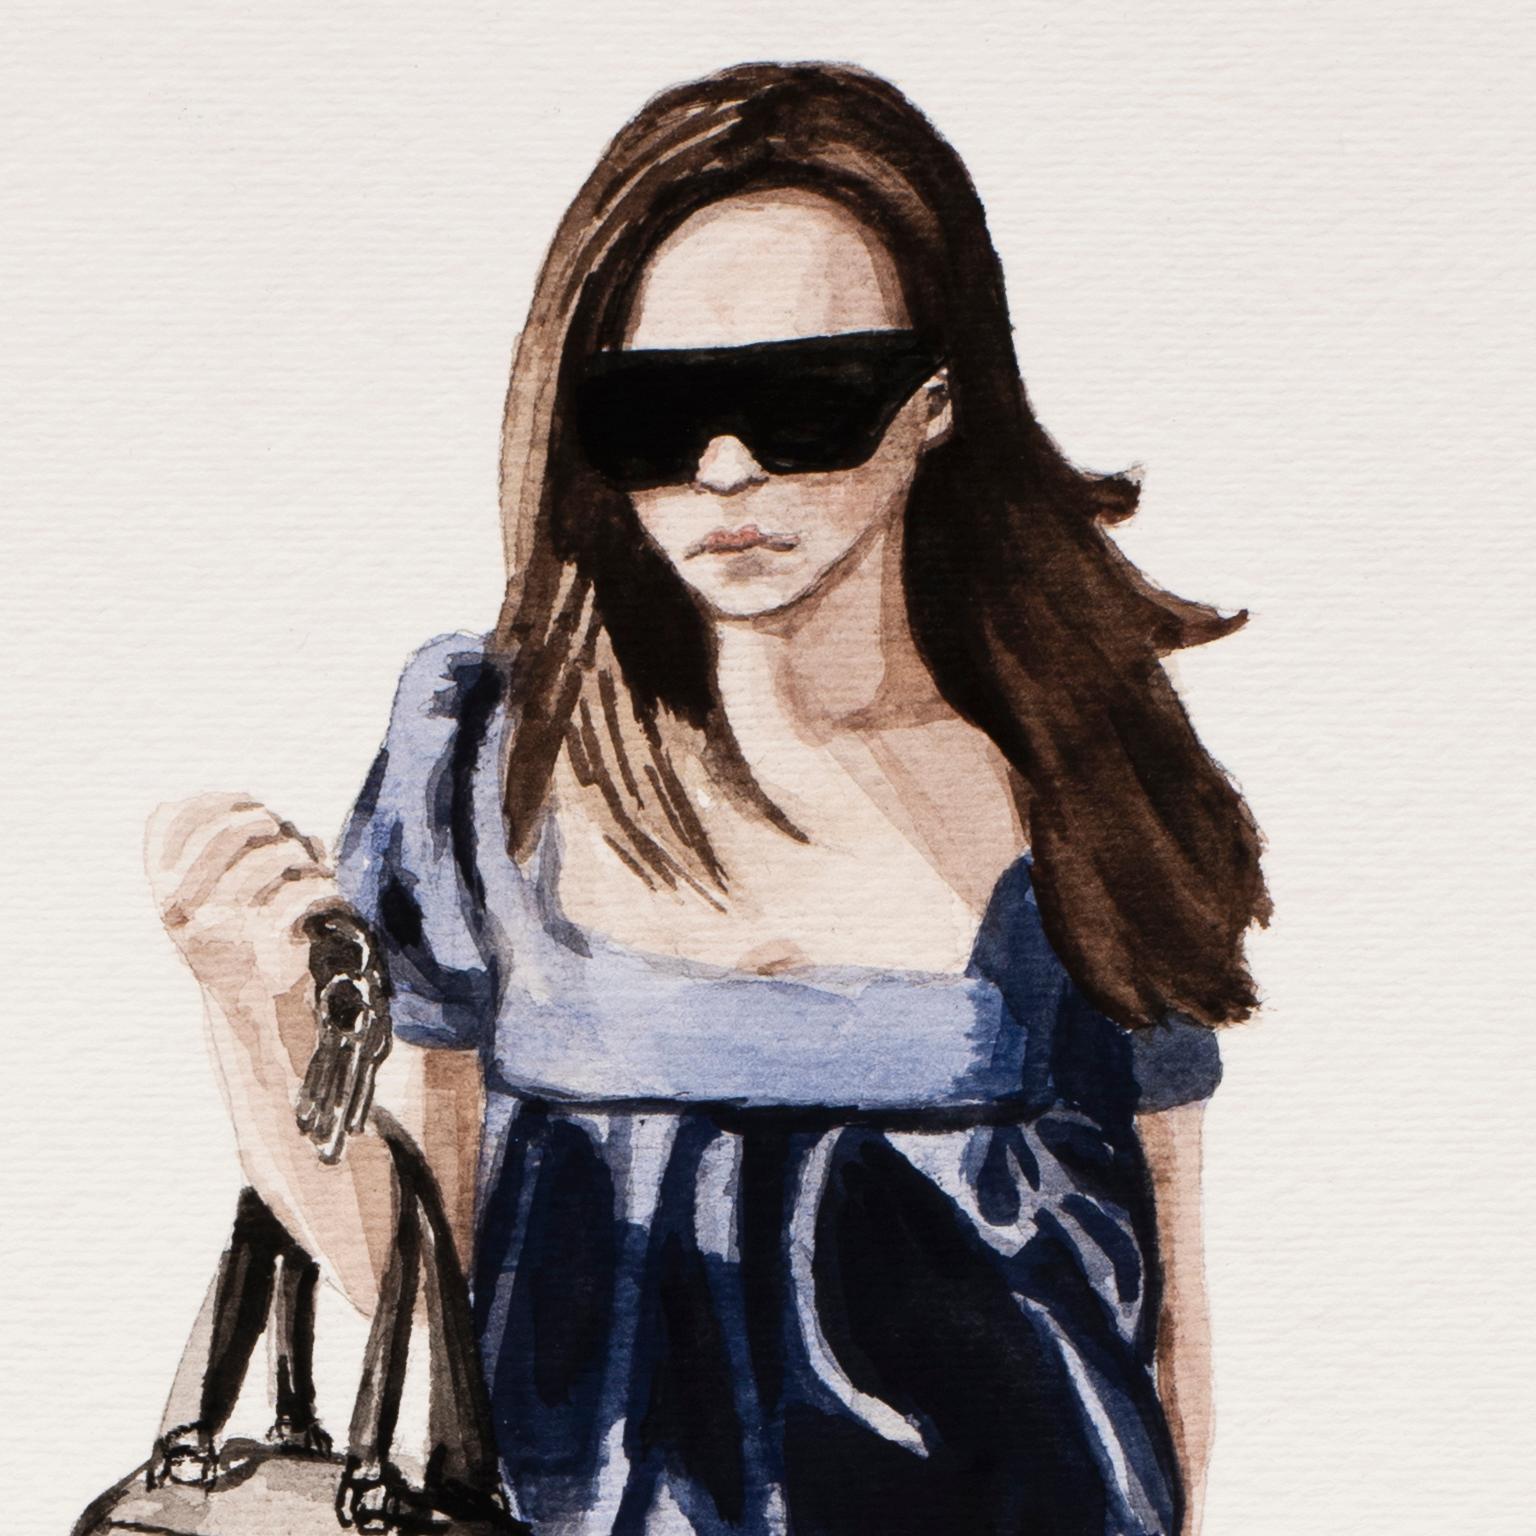 Courtney Incognito 032 by Courtney Miles, 2008. 
Original gouache and graphite on paper. 
11 x 8 inches Unframed
Brunette with blue top.

Courtney Miles originally did 100 works for the Courtney Incognito series in 2007-2008.
These paparazzi style